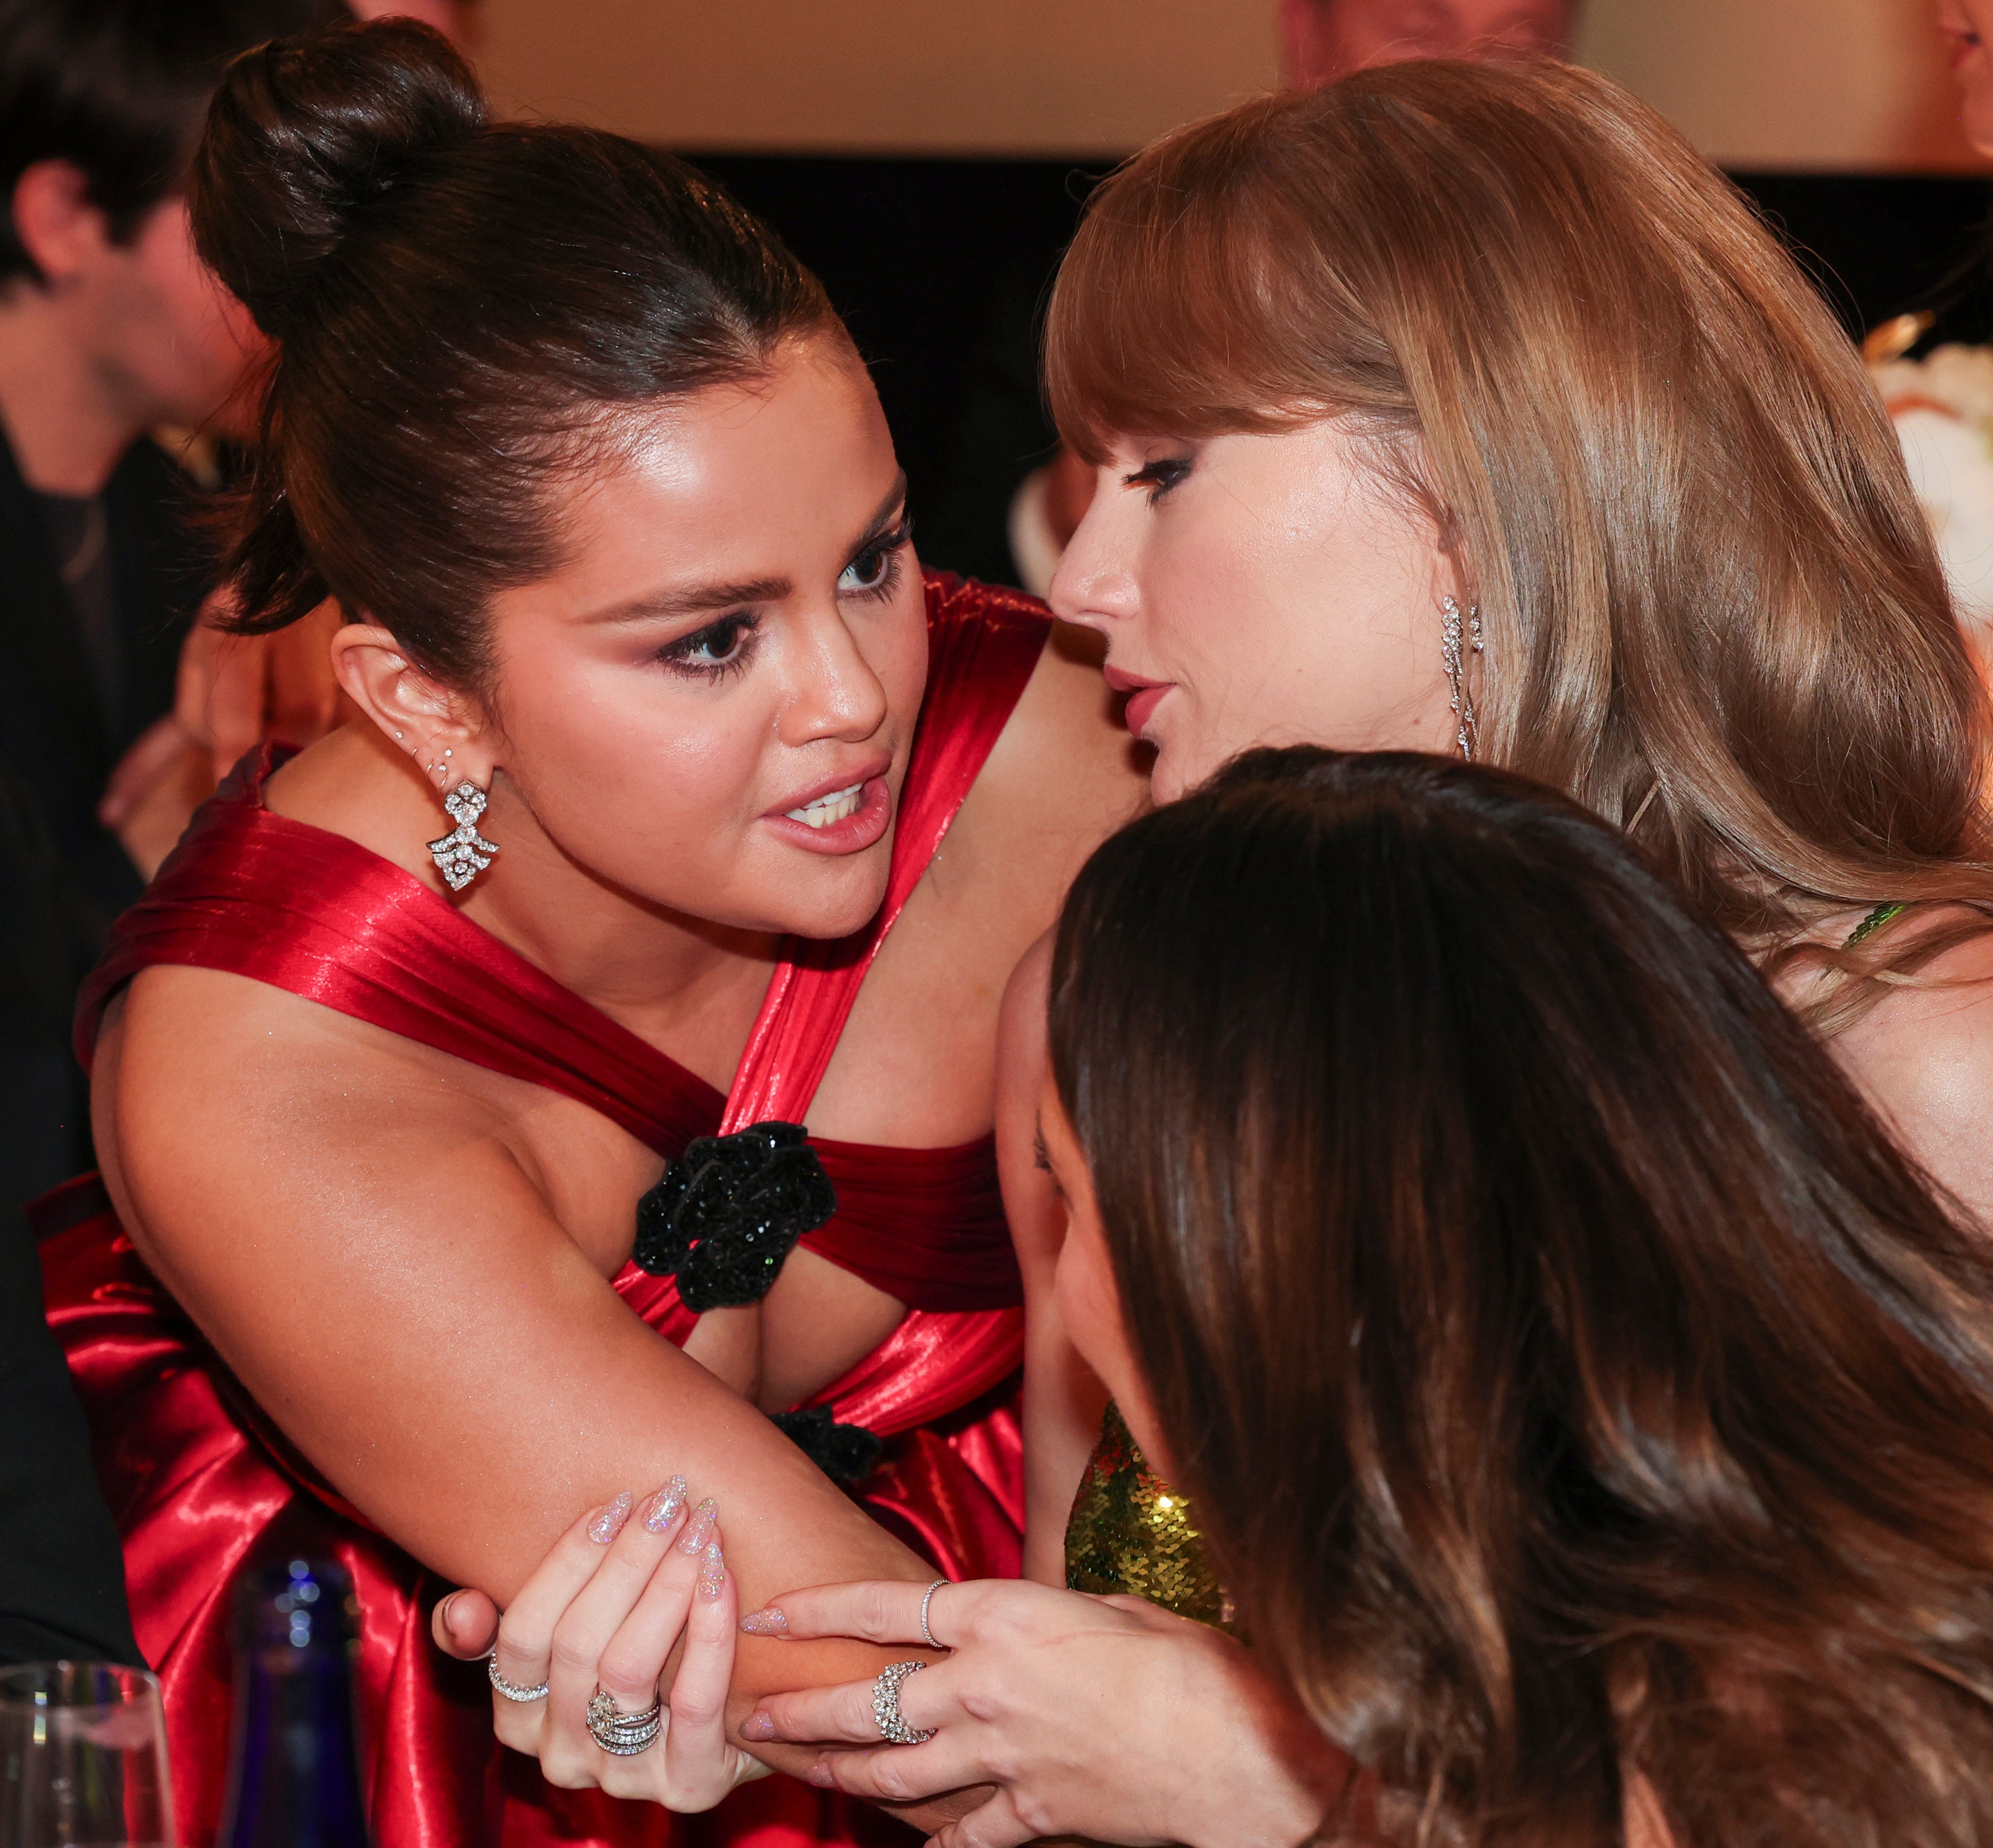 Taylor and Selena in elegant attire leaning close, engaged in a private conversation at a formal event